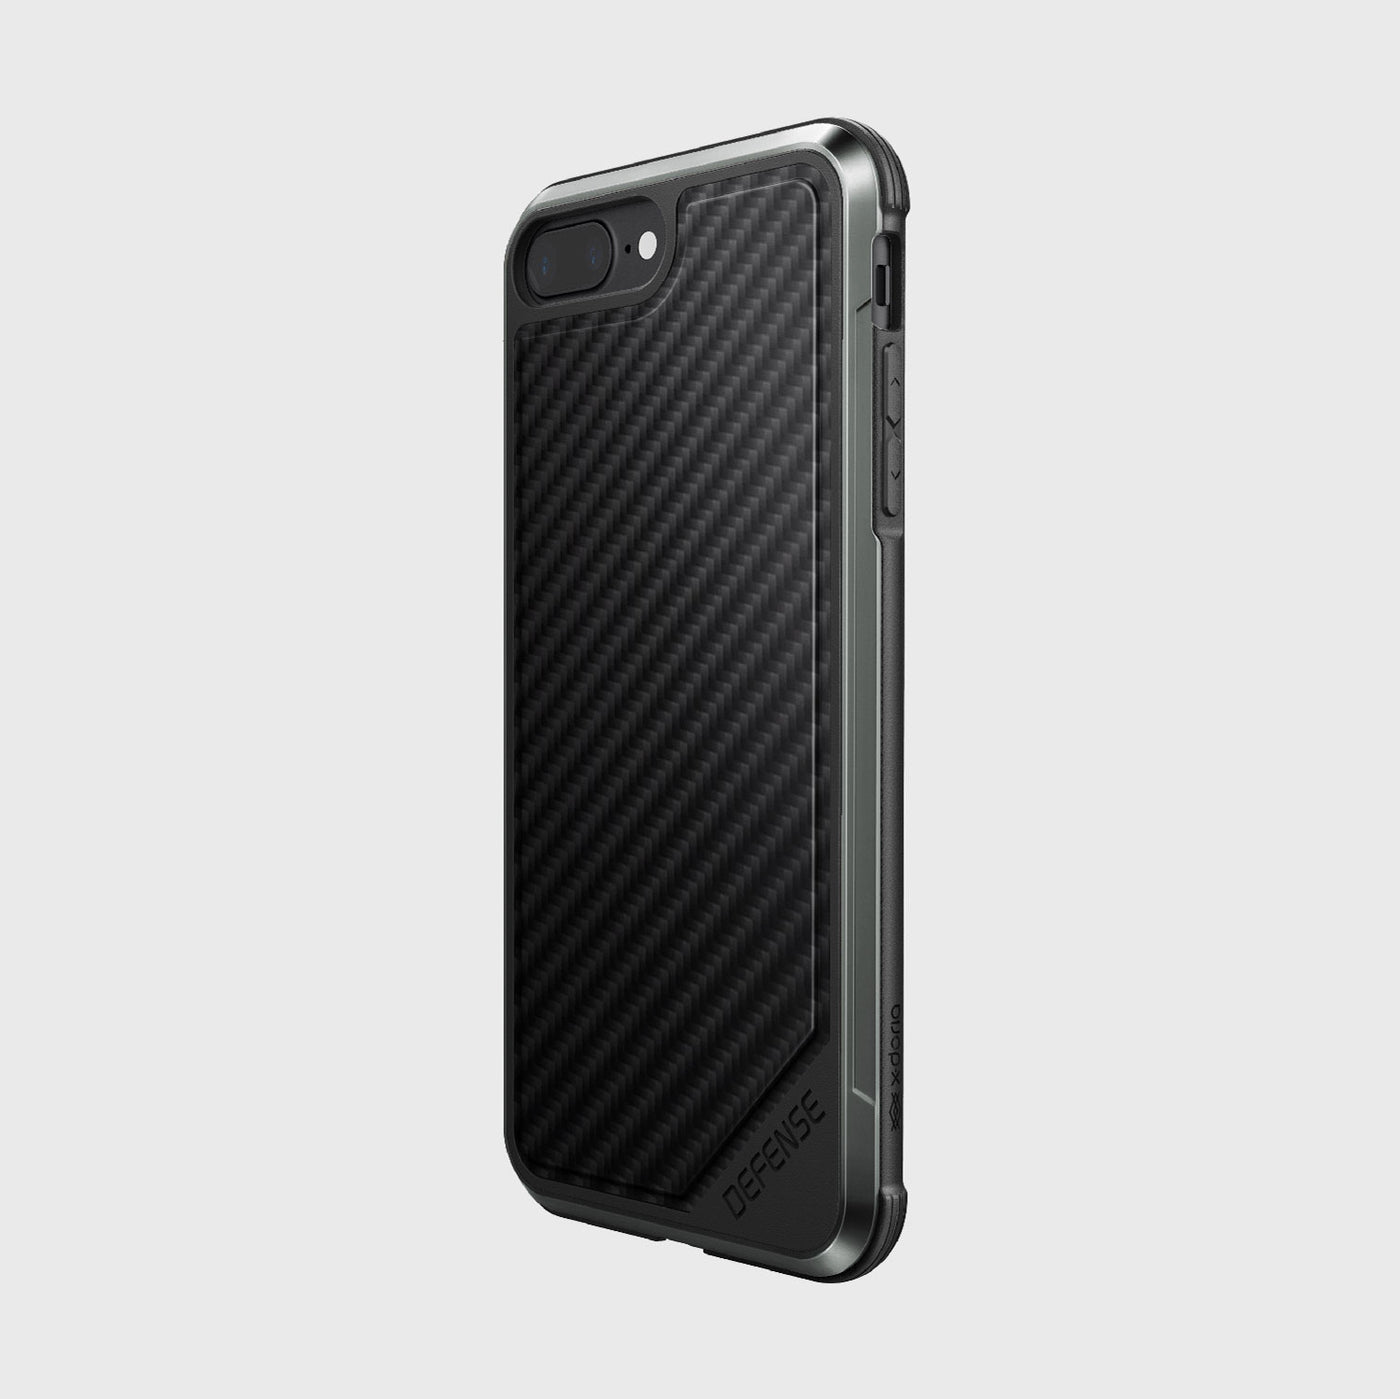 Luxurious Case for iPhone 8 Plus. Raptic Lux in black leather.